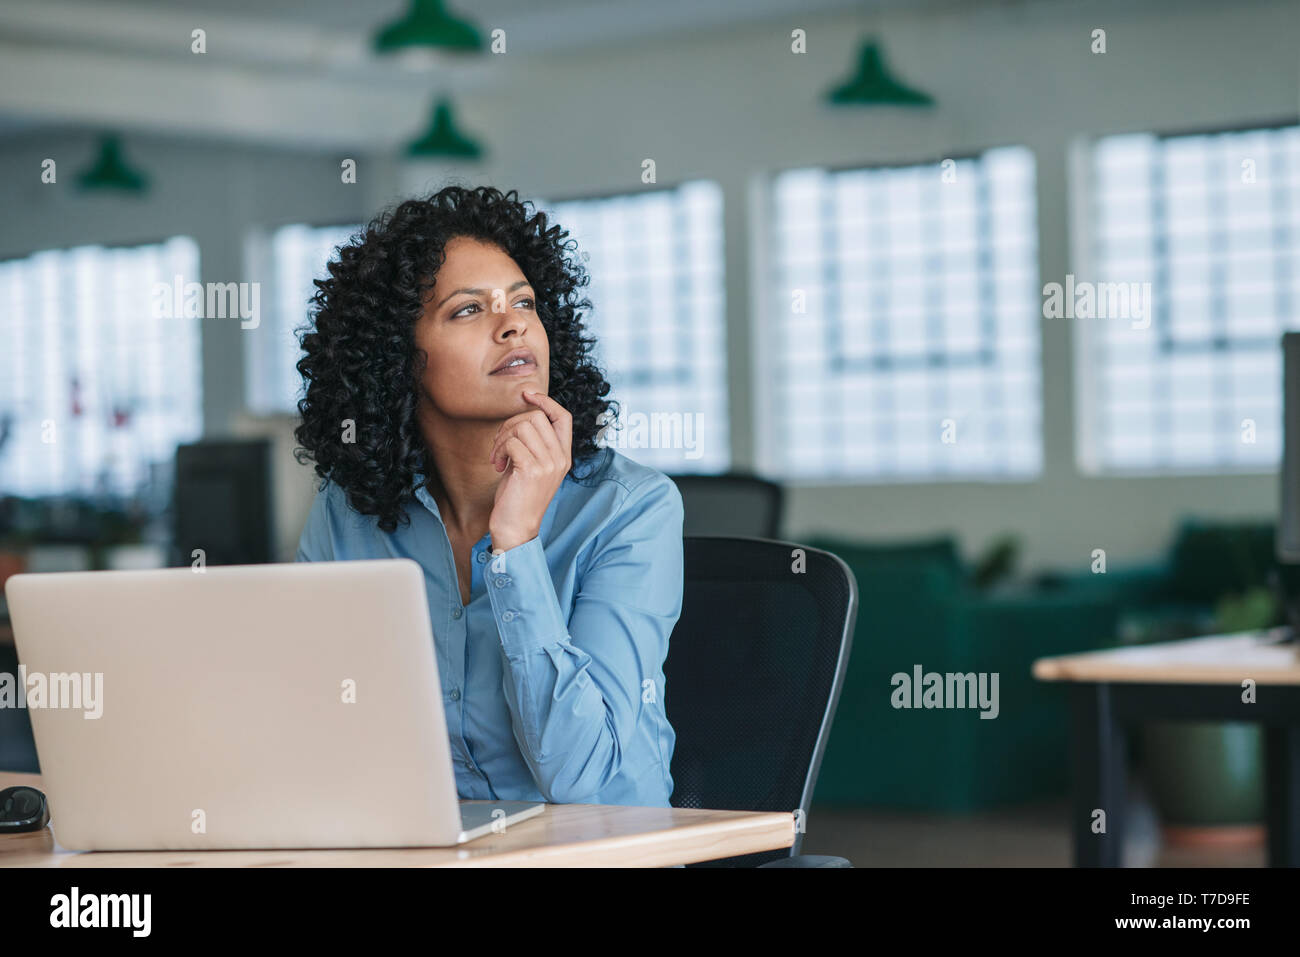 Young businesswoman thinking while using a laptop at work Stock Photo